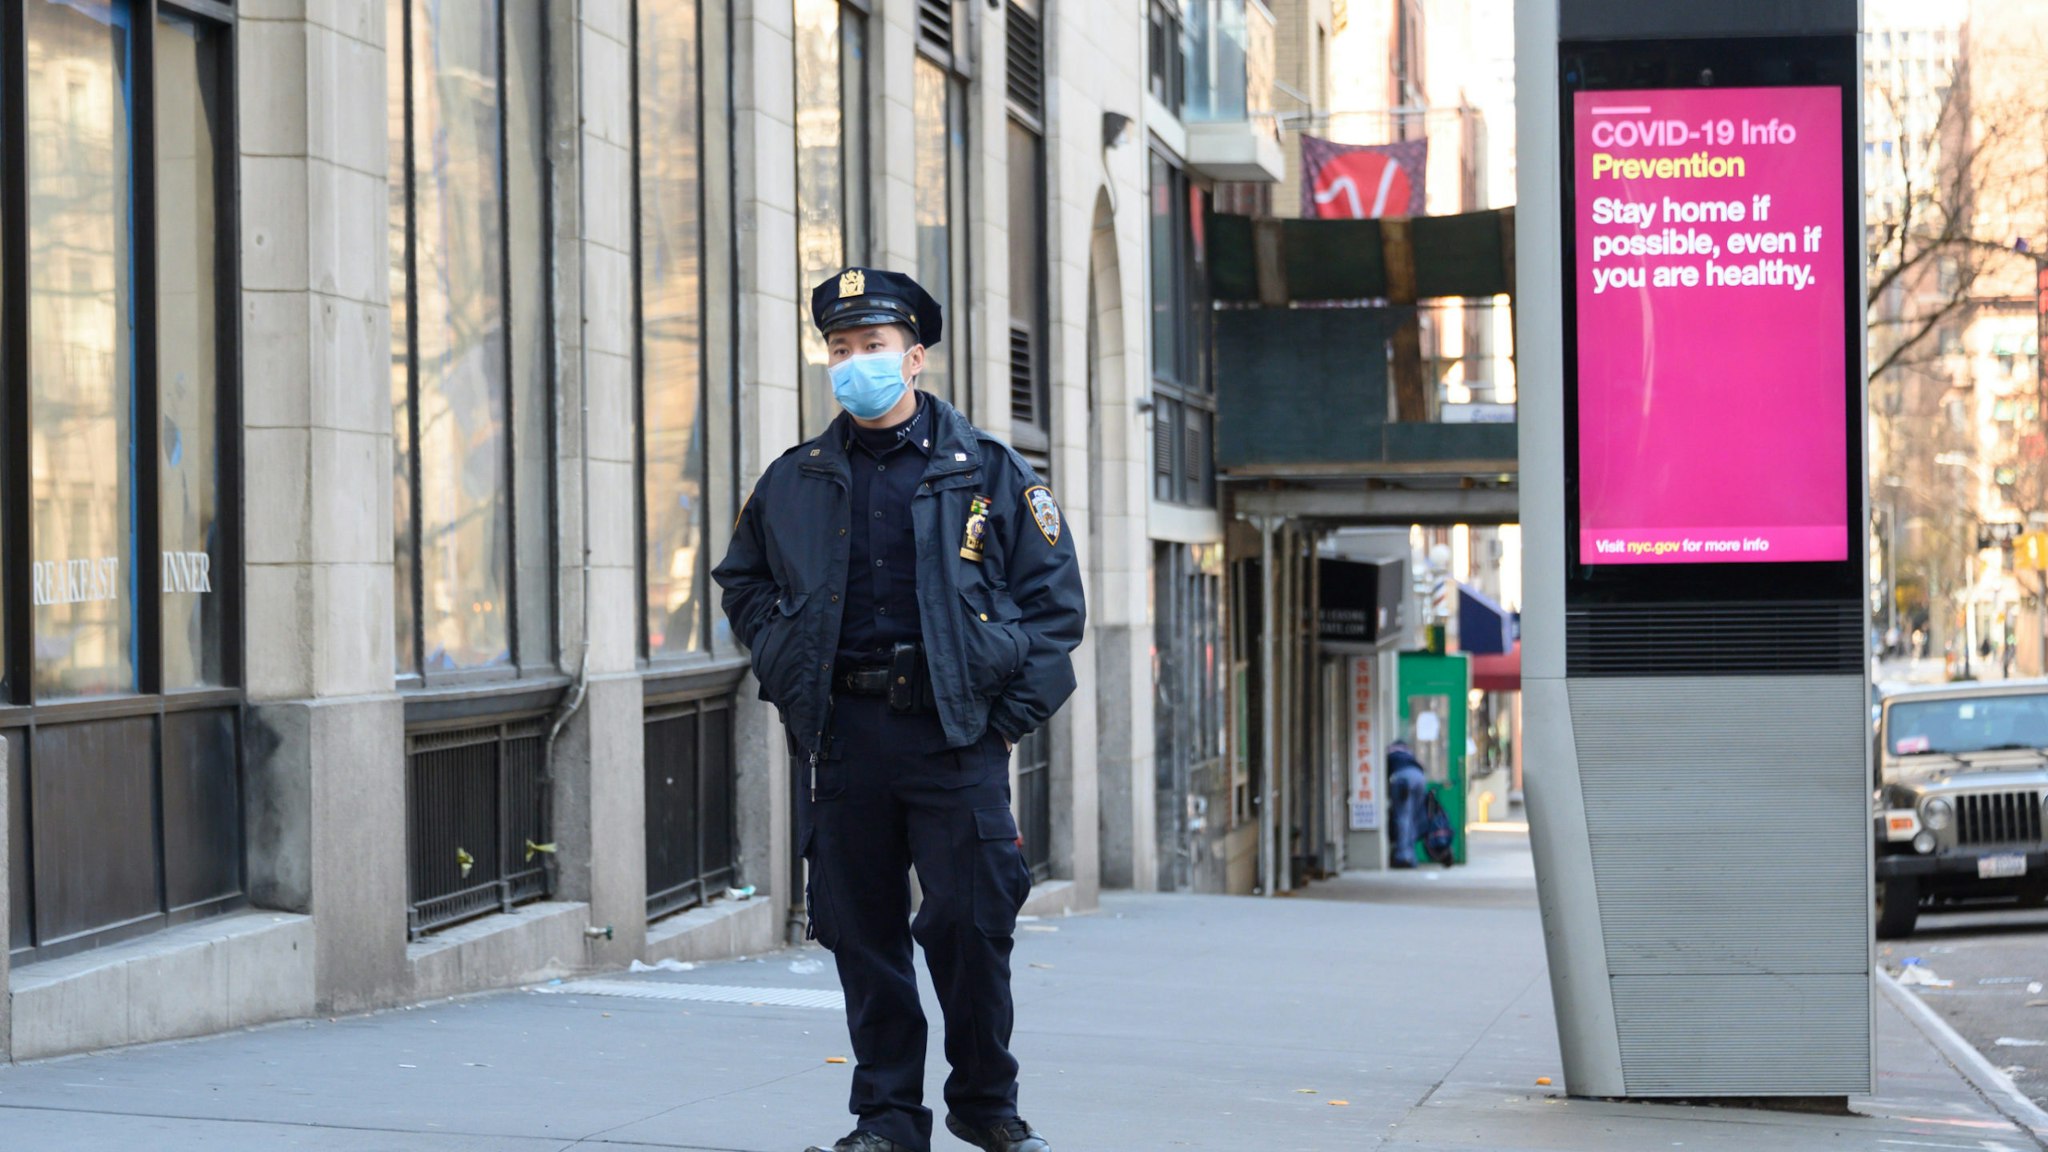 An NYPD police officer is seen wearing a protective face mask next to a LinkNYC screen with information related to COVID-19 as the coronavirus continues to spread across the United States on March 27, 2020 in New York City.